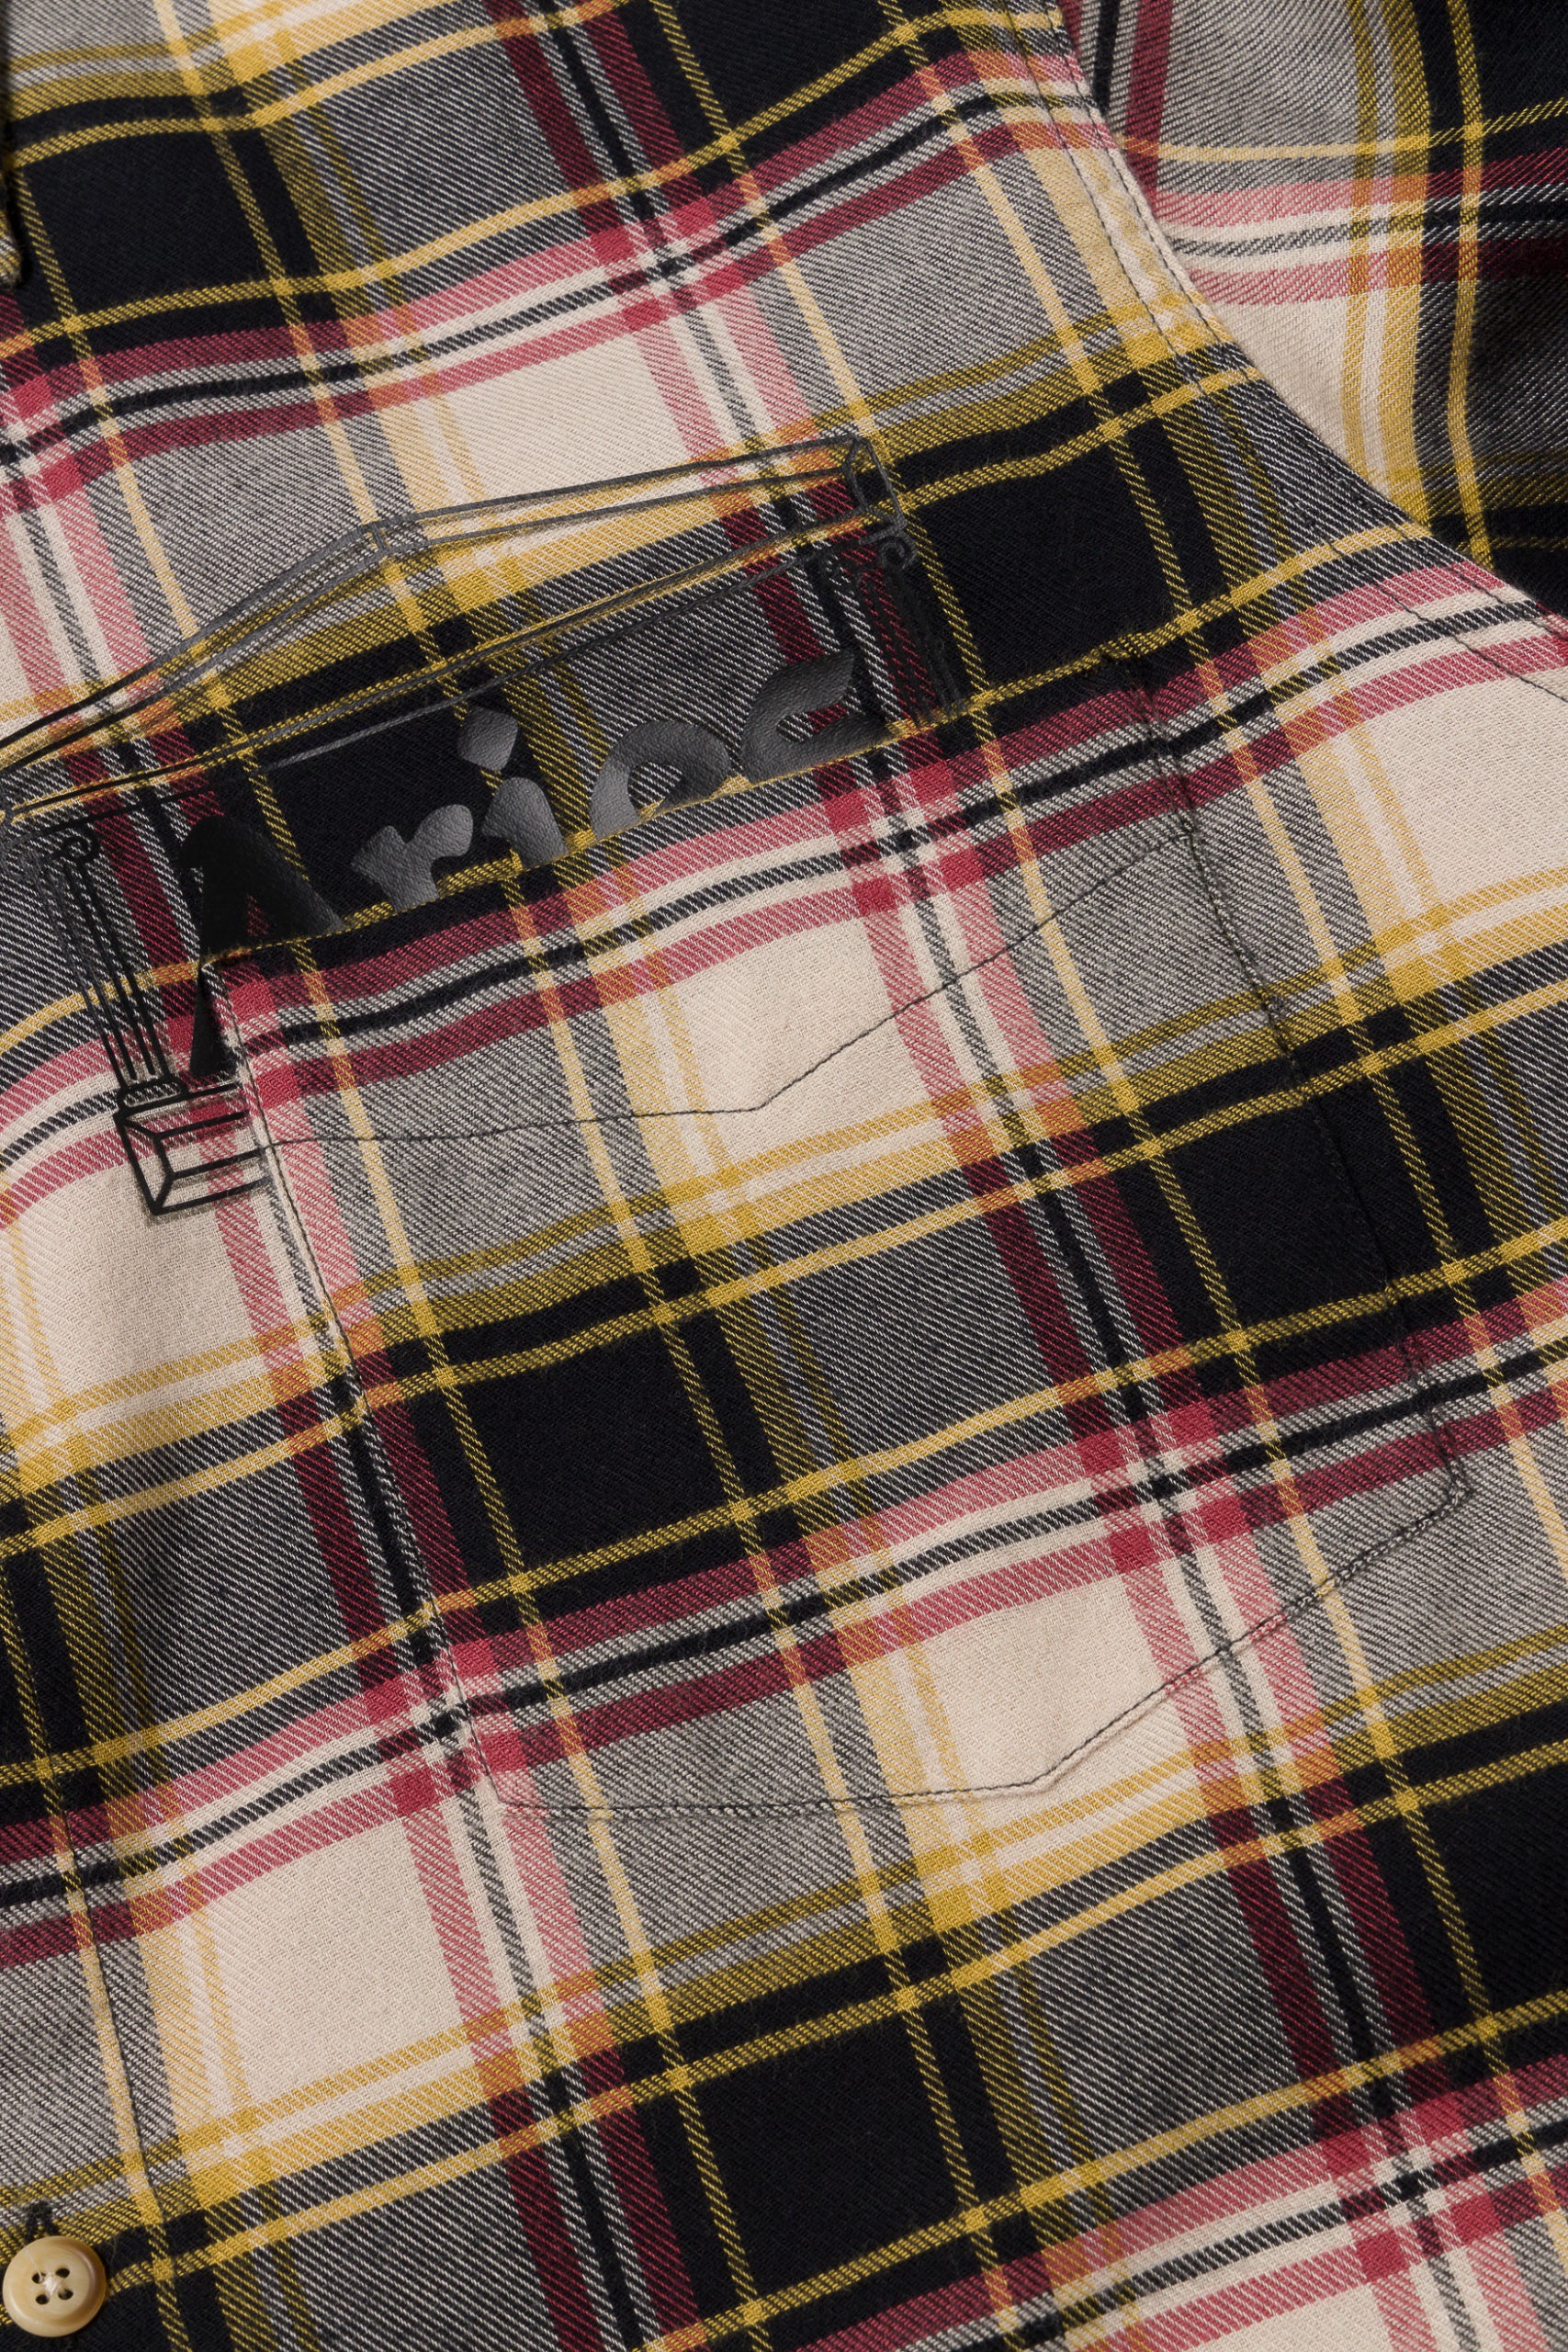 Load image into Gallery viewer, Plaid Flannel Shirt